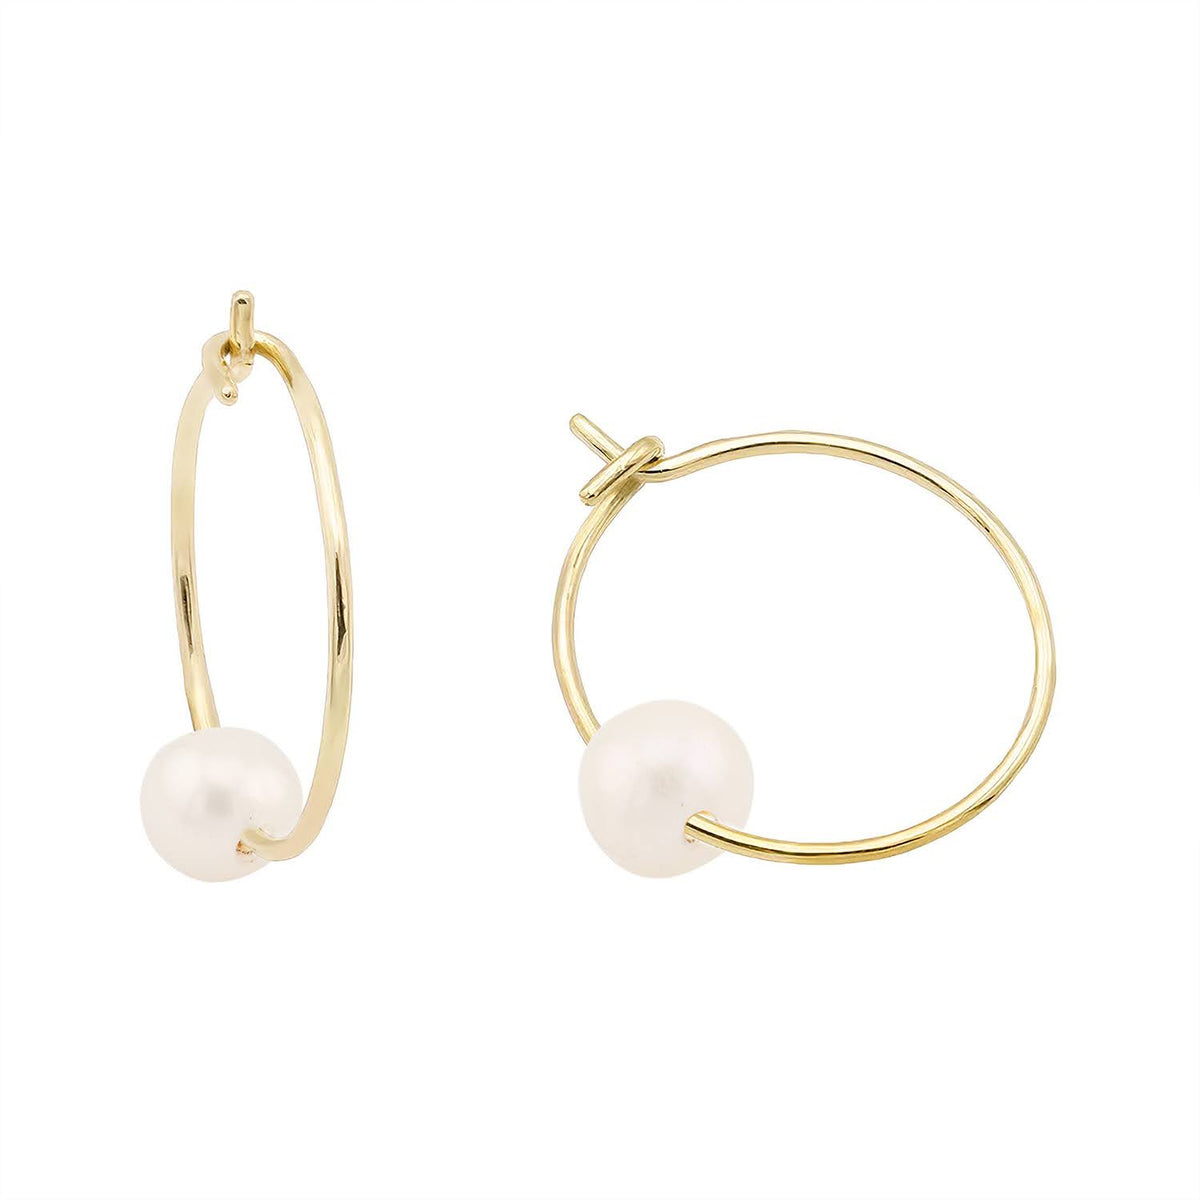 Creole earrings with white Pearl 14k yellow gold